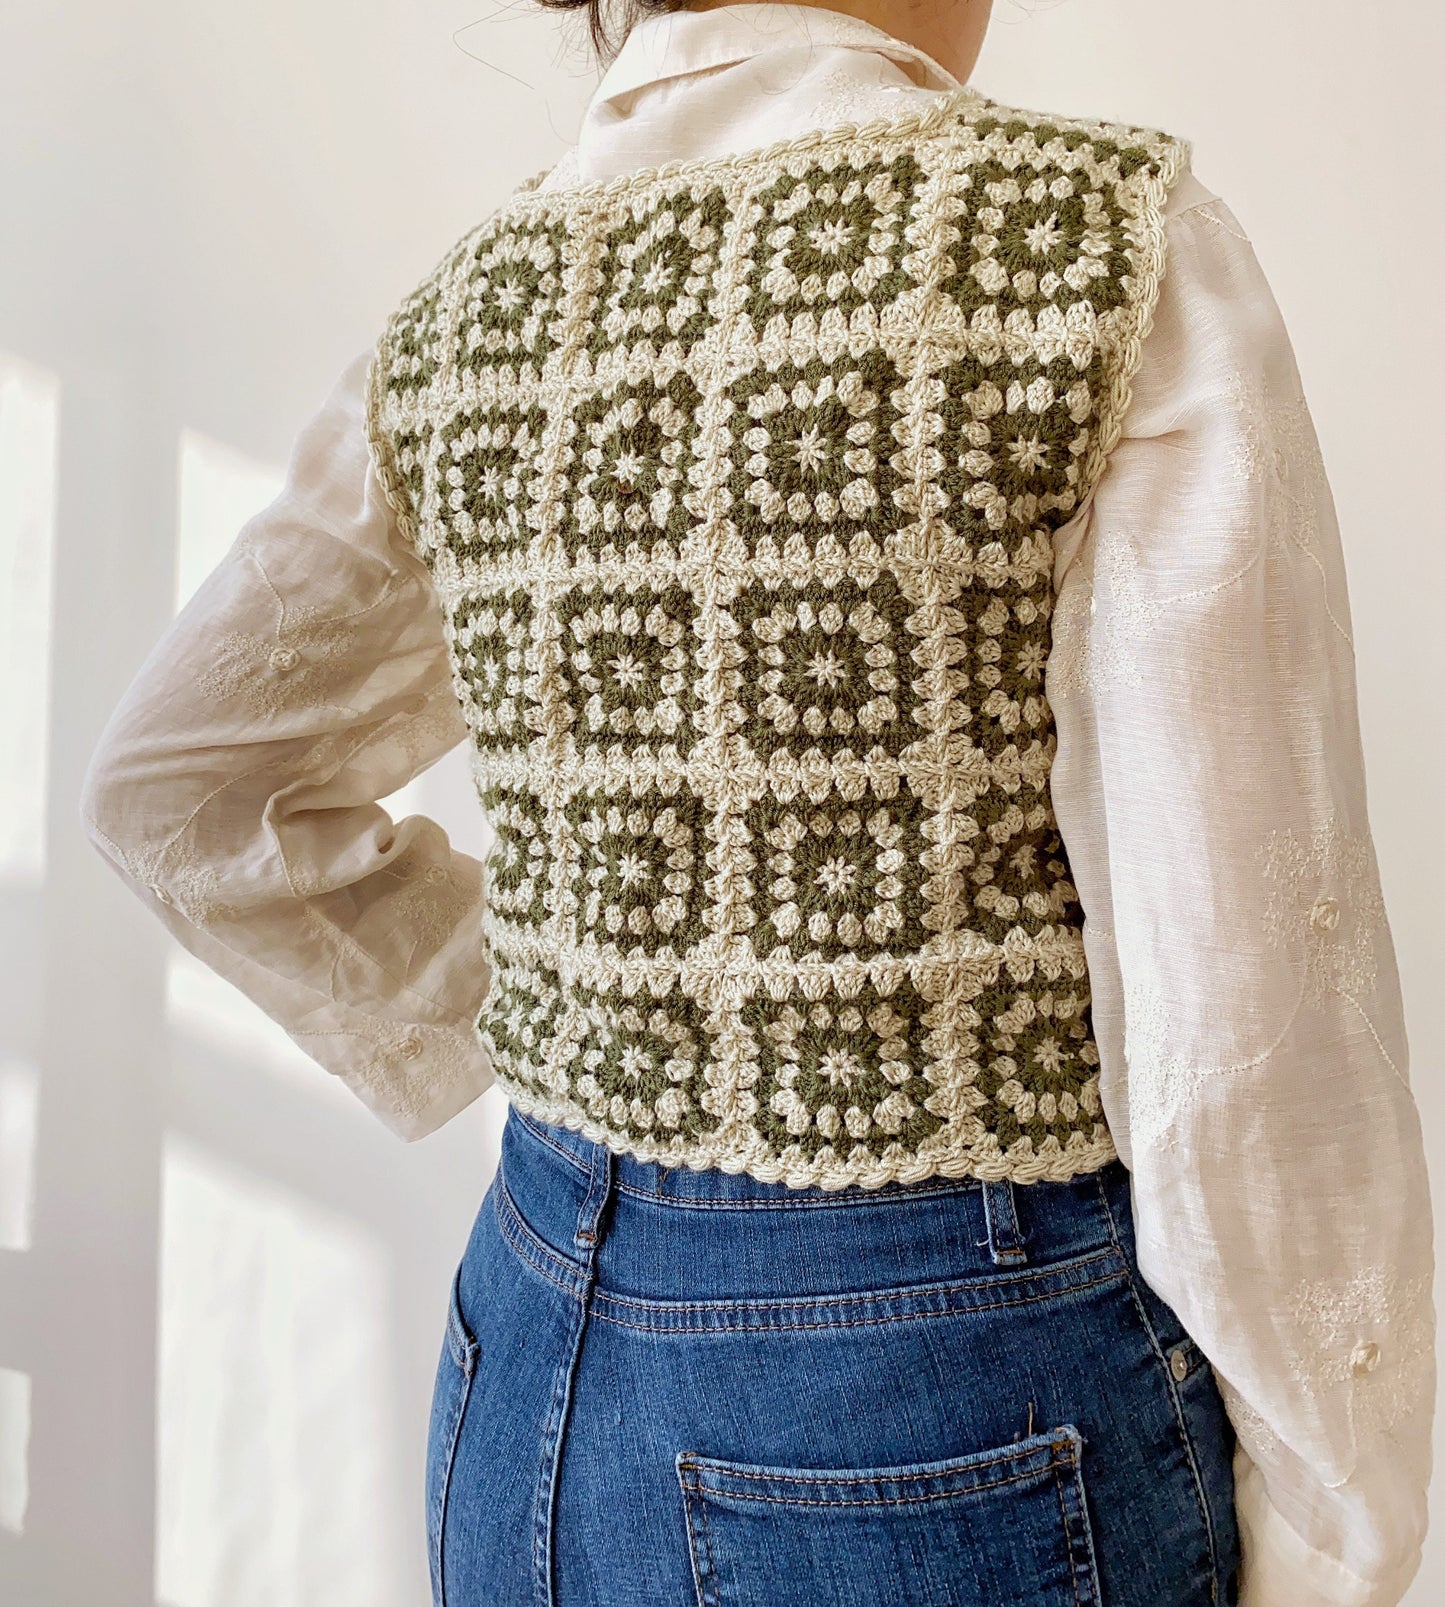 Handknitted Crochet Vest with Retro Granny Squares